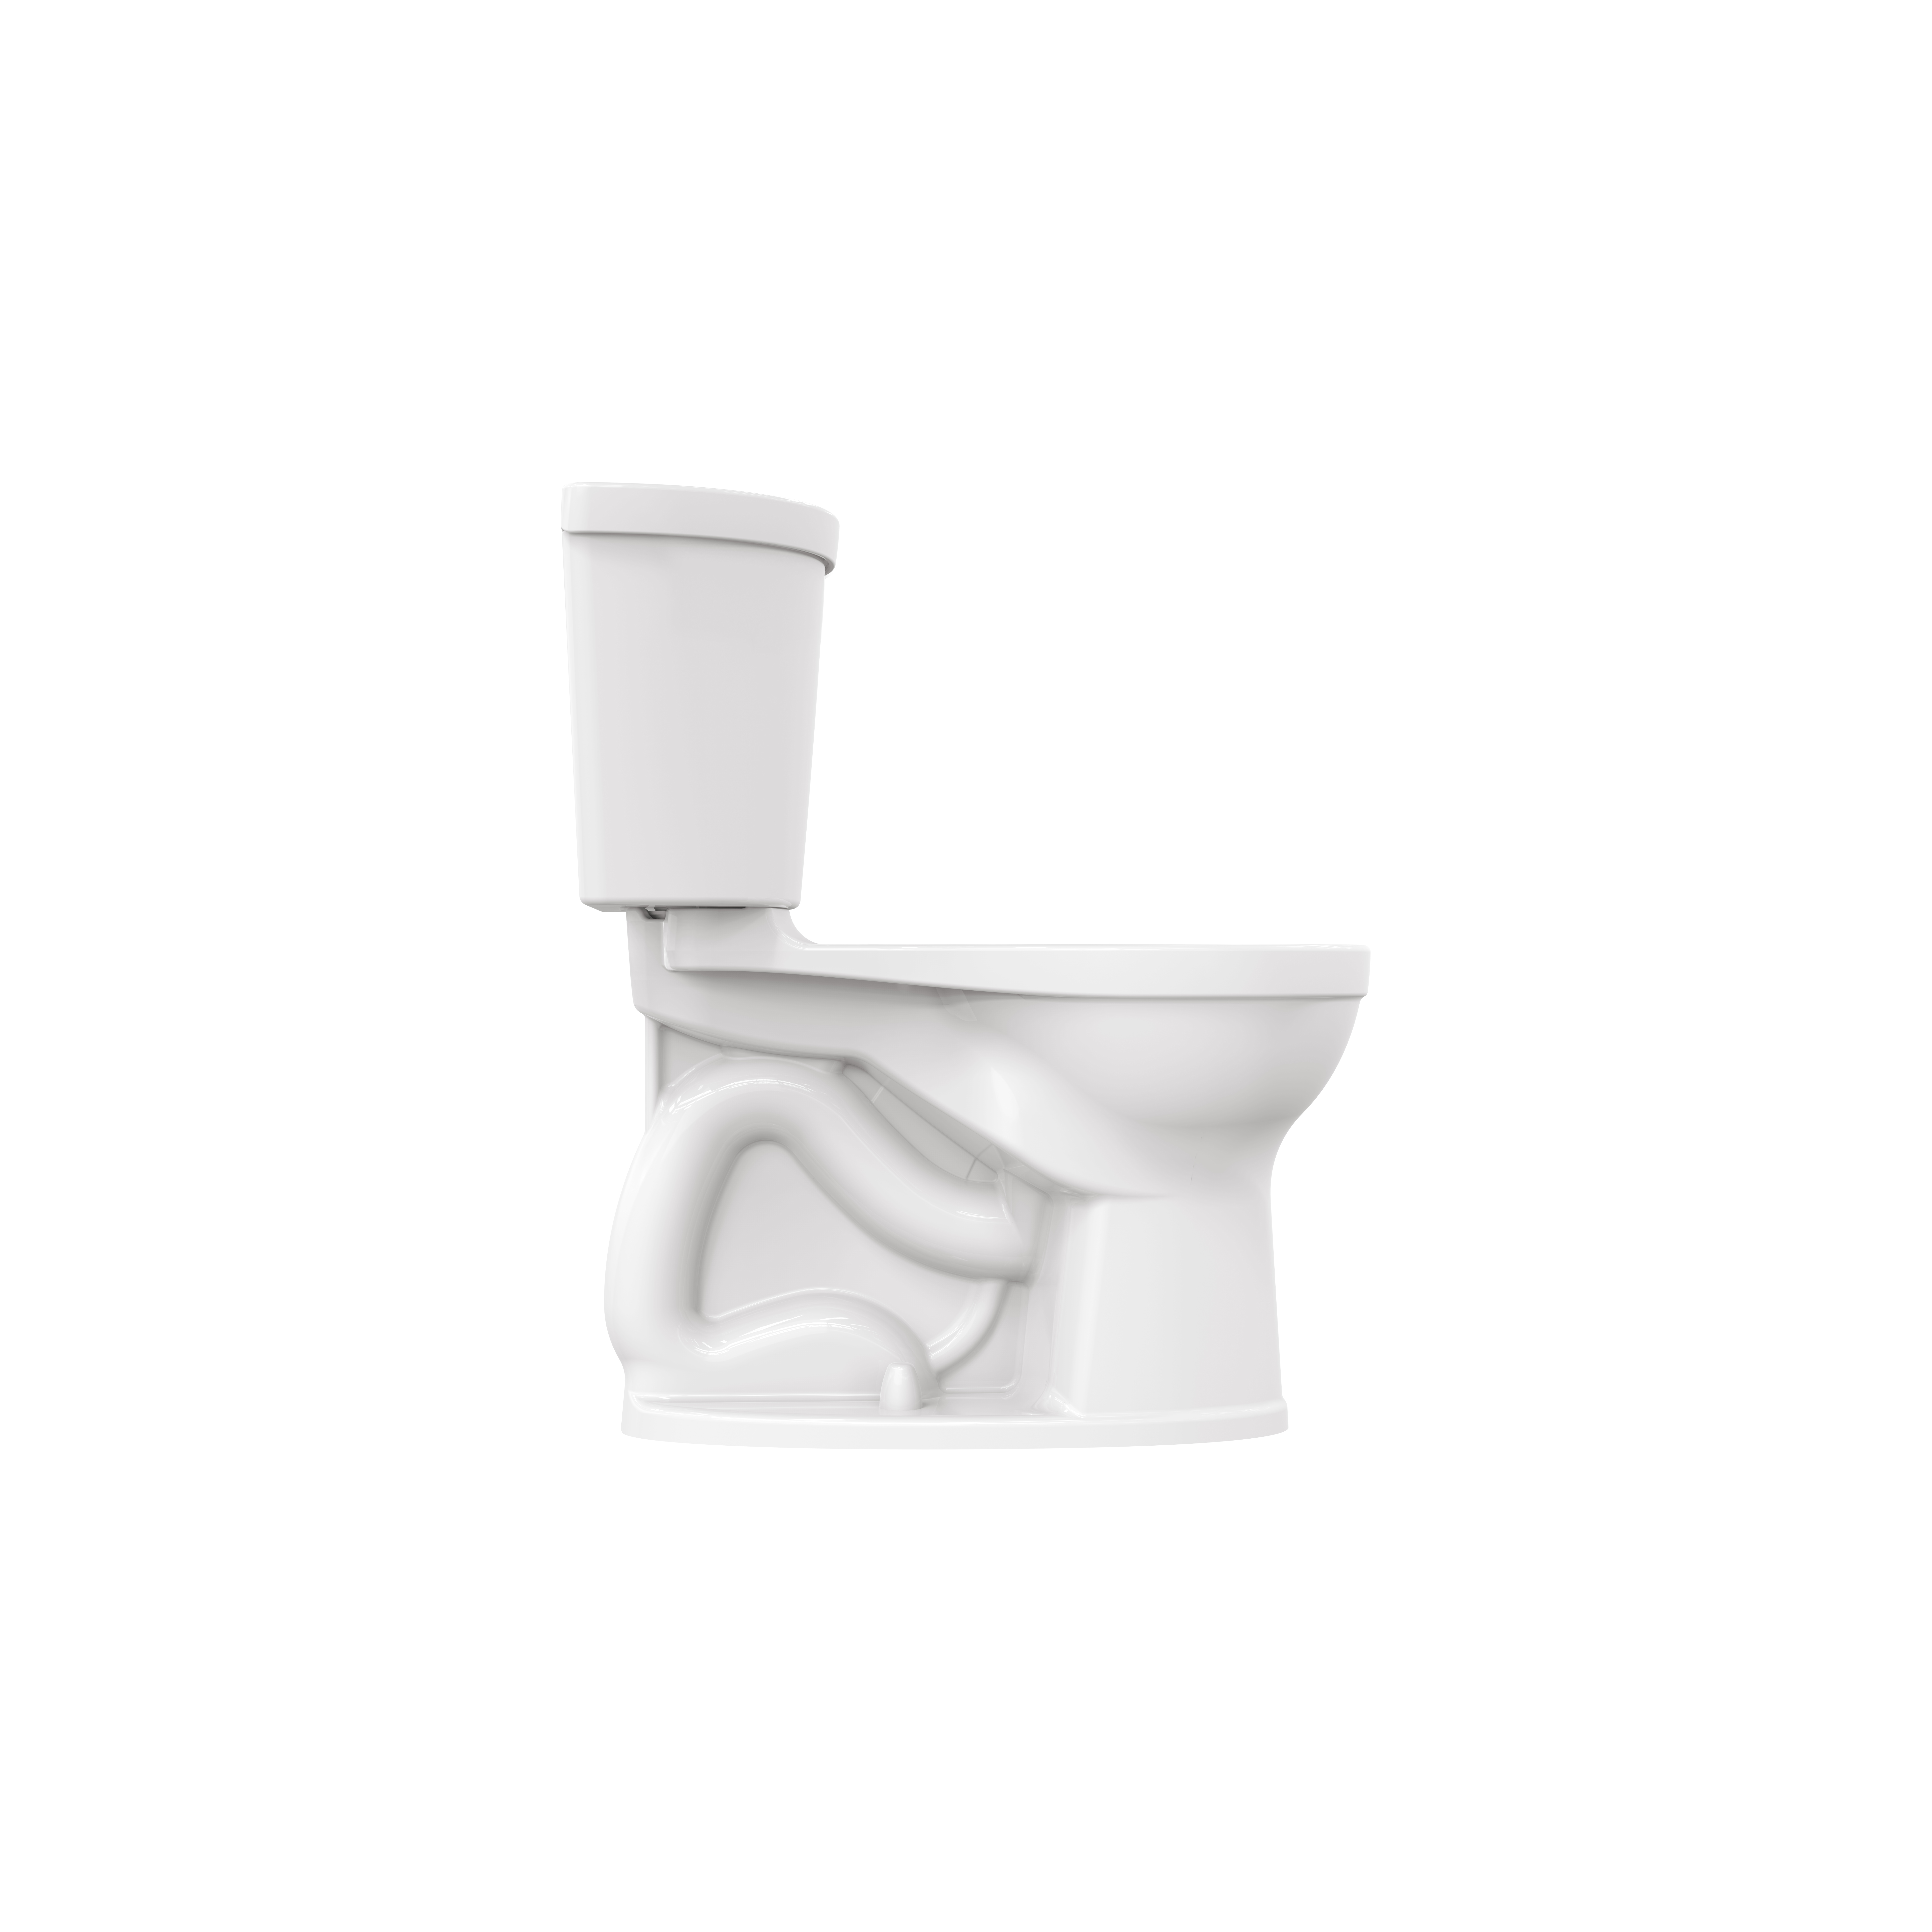 Champion PRO Two-Piece 1.28 gpf/4.8 Lpf Chair Height Round Front Right Hand Trip Lever Toilet less Seat